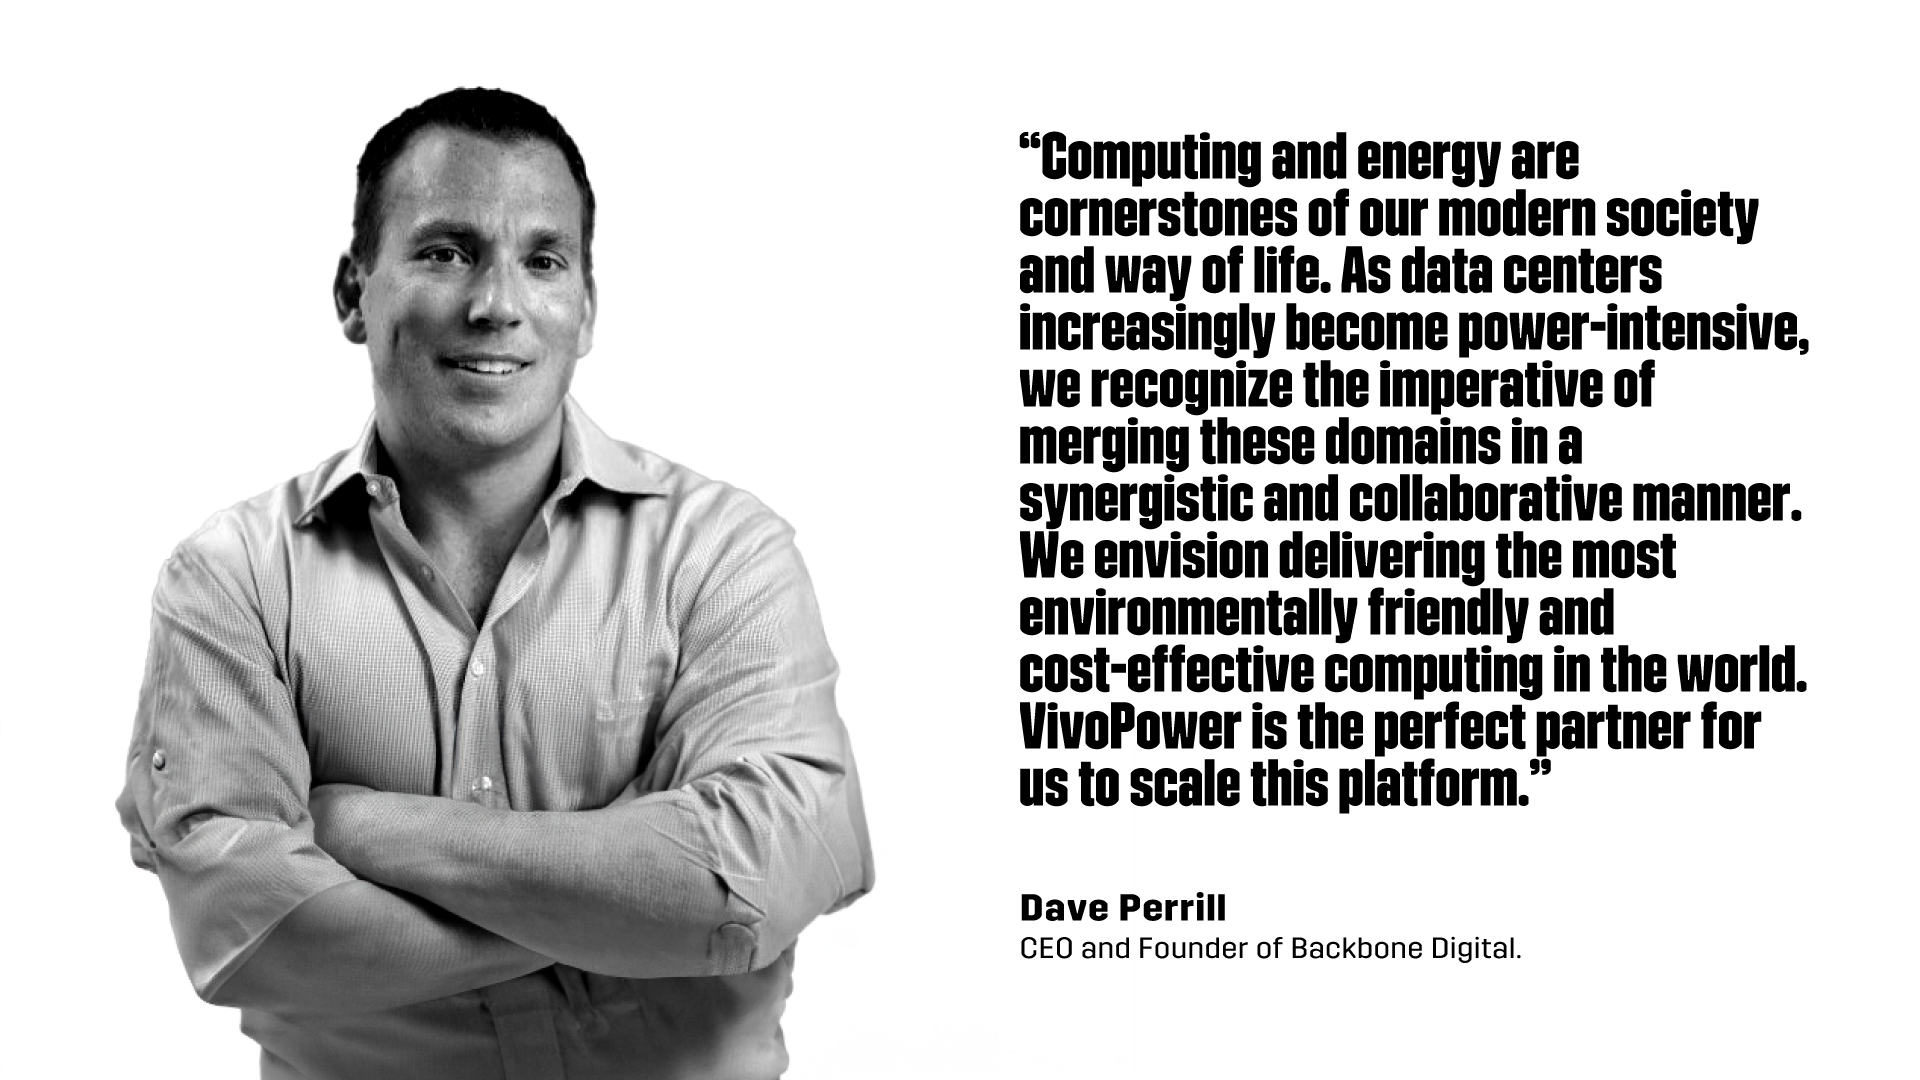 “Computing and energy are cornerstones of our modern society and way of life. As data centers increasingly become power-intensive, we recognize the imperative of merging these domains in a synergistic and collaborative manner. We envision delivering the most environmentally friendly and cost-effective computing in the world. VivoPower is the perfect partner for us to scale this platform.”  - Dave Perrill, CEO and Founder of Backbone Digital.